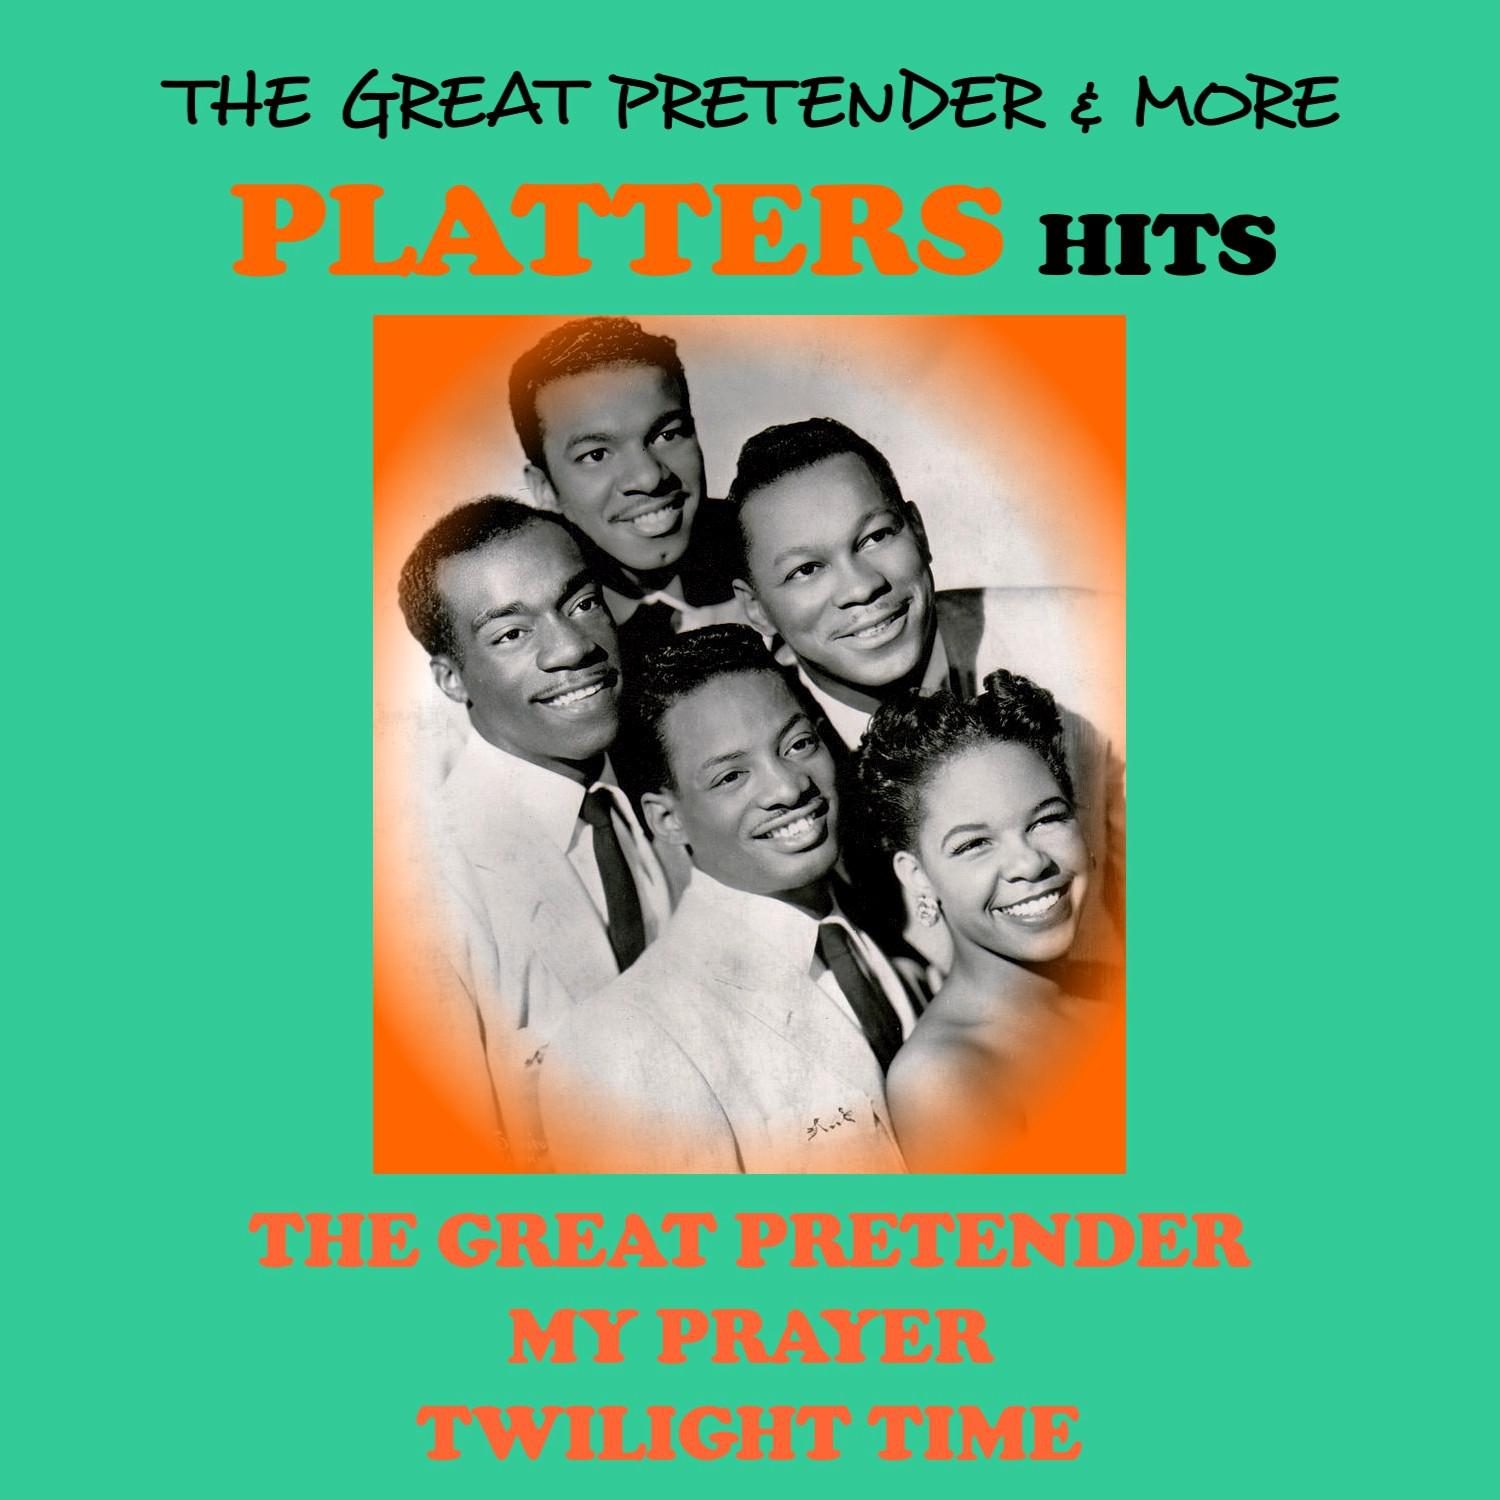 The Great Pretender & More Platters Hits